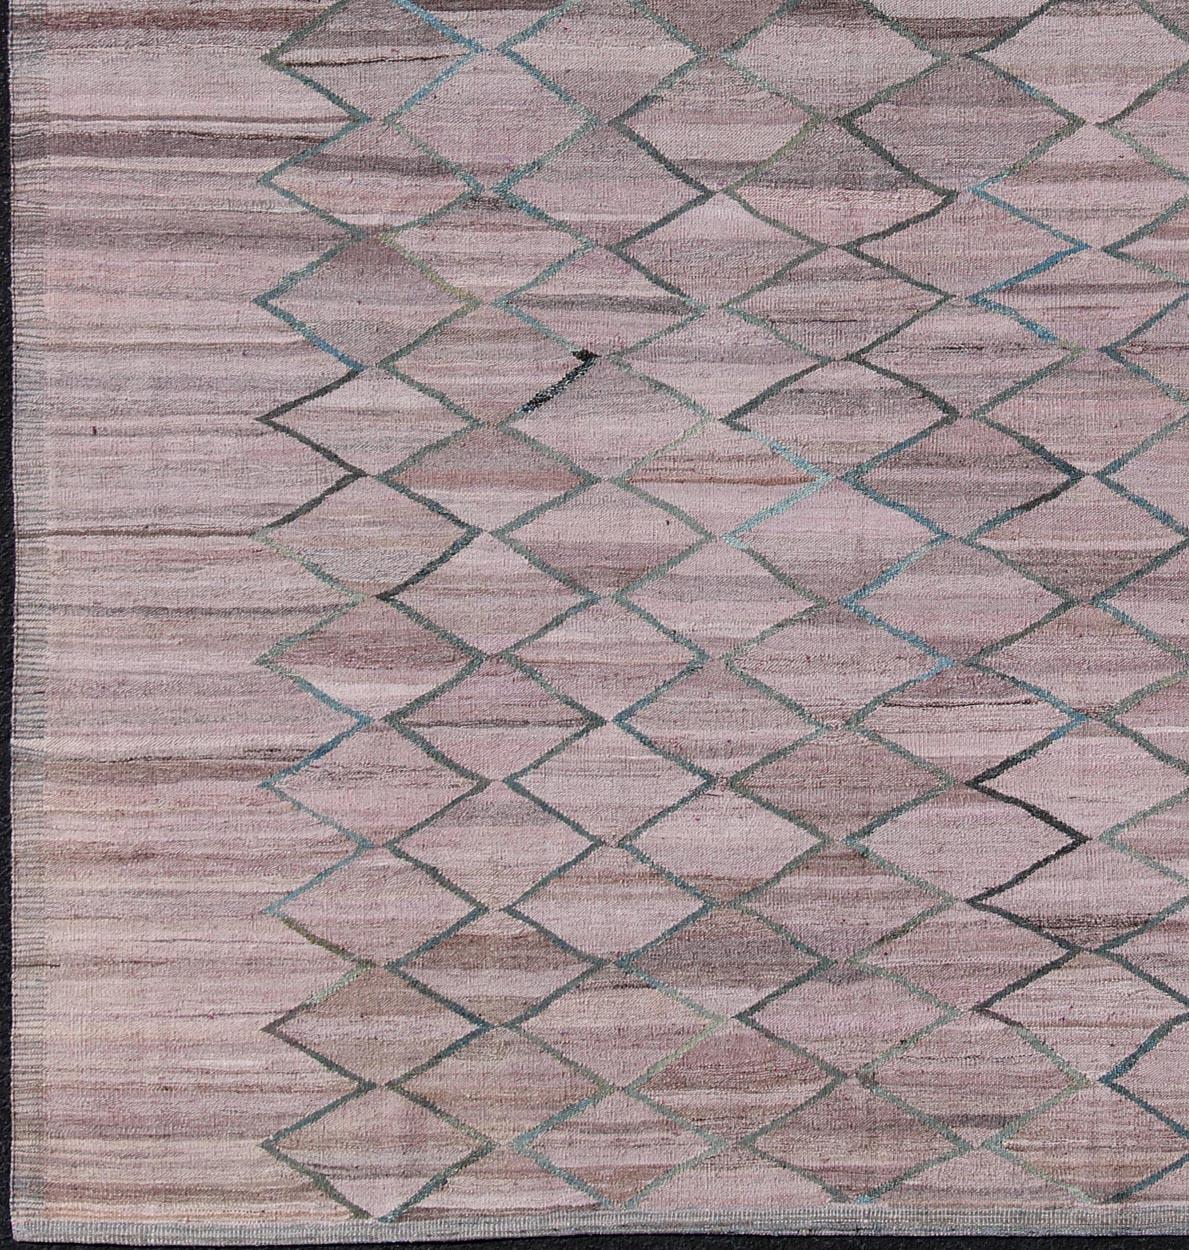 Modern Kilim from Afghanistan with fine wool. Keivan Woven Arts Rug  AFG-27580. This light Lavender/pink and gray colored piece features a repeating diamond pattern, perfect for any modern interior as well as any classic interiors with a Minimalist